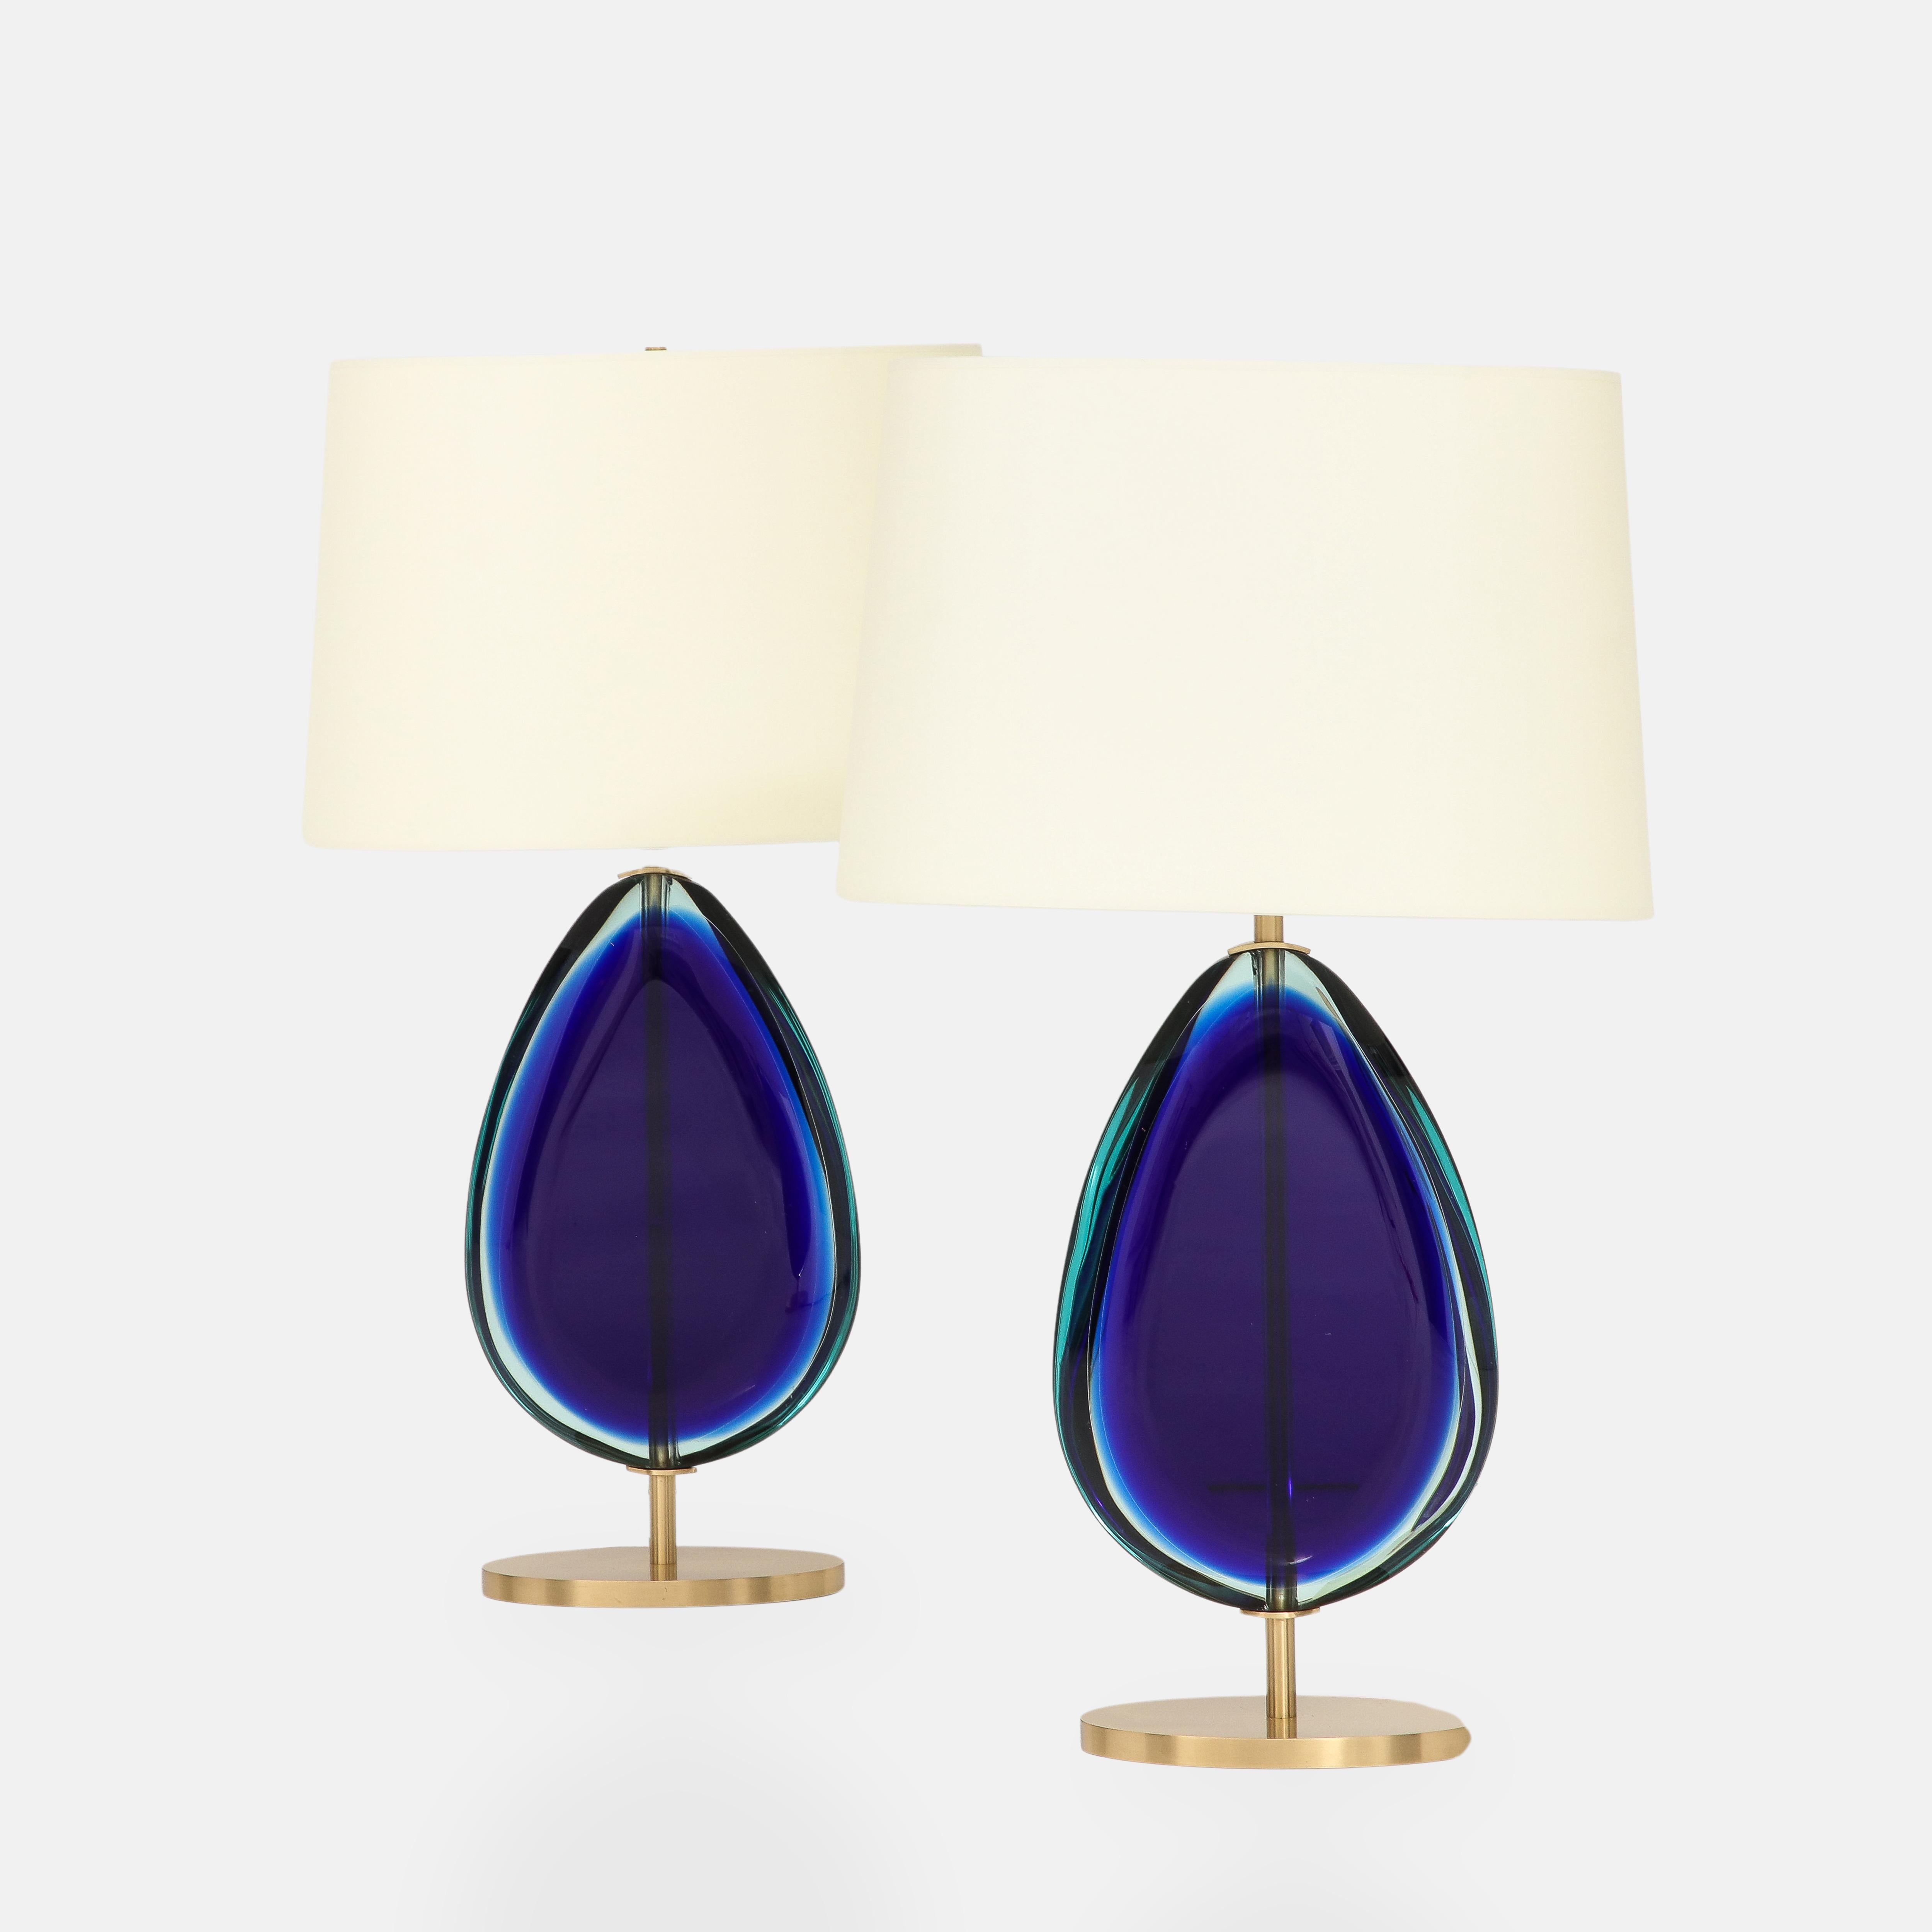 Effetto Vetro contemporary pair of table lamps each with large shaped blue glass in teardrop form suspended from satin brass stem and oval base with oval ivory paper shades.  These lovely and elegant table lamps are handmade and require intensive